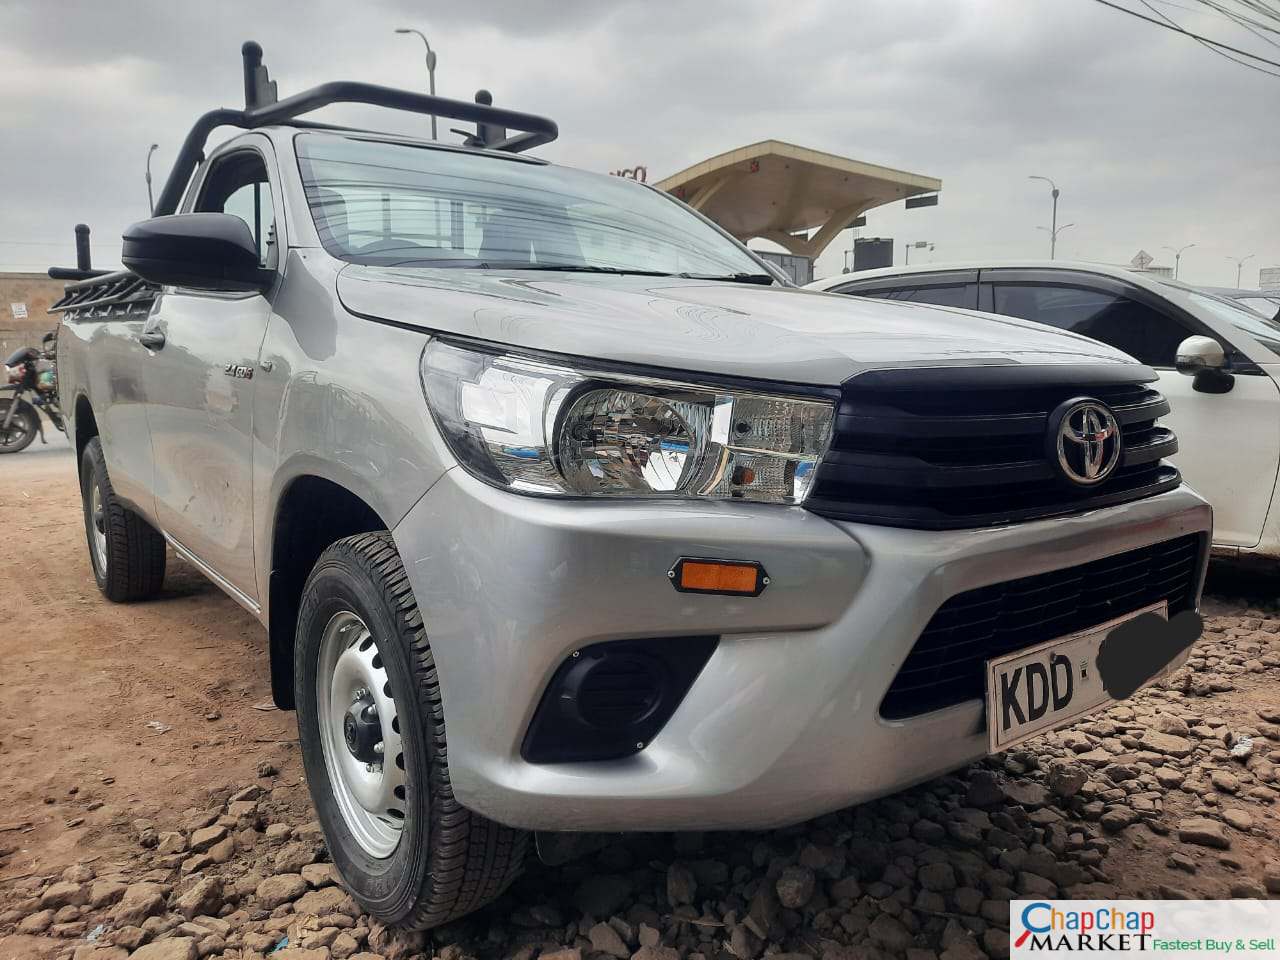 Toyota Hilux for sale in Kenya You Pay 30% Deposit trade in OK EXCLUSIVE hire purchase installments bank finance ok